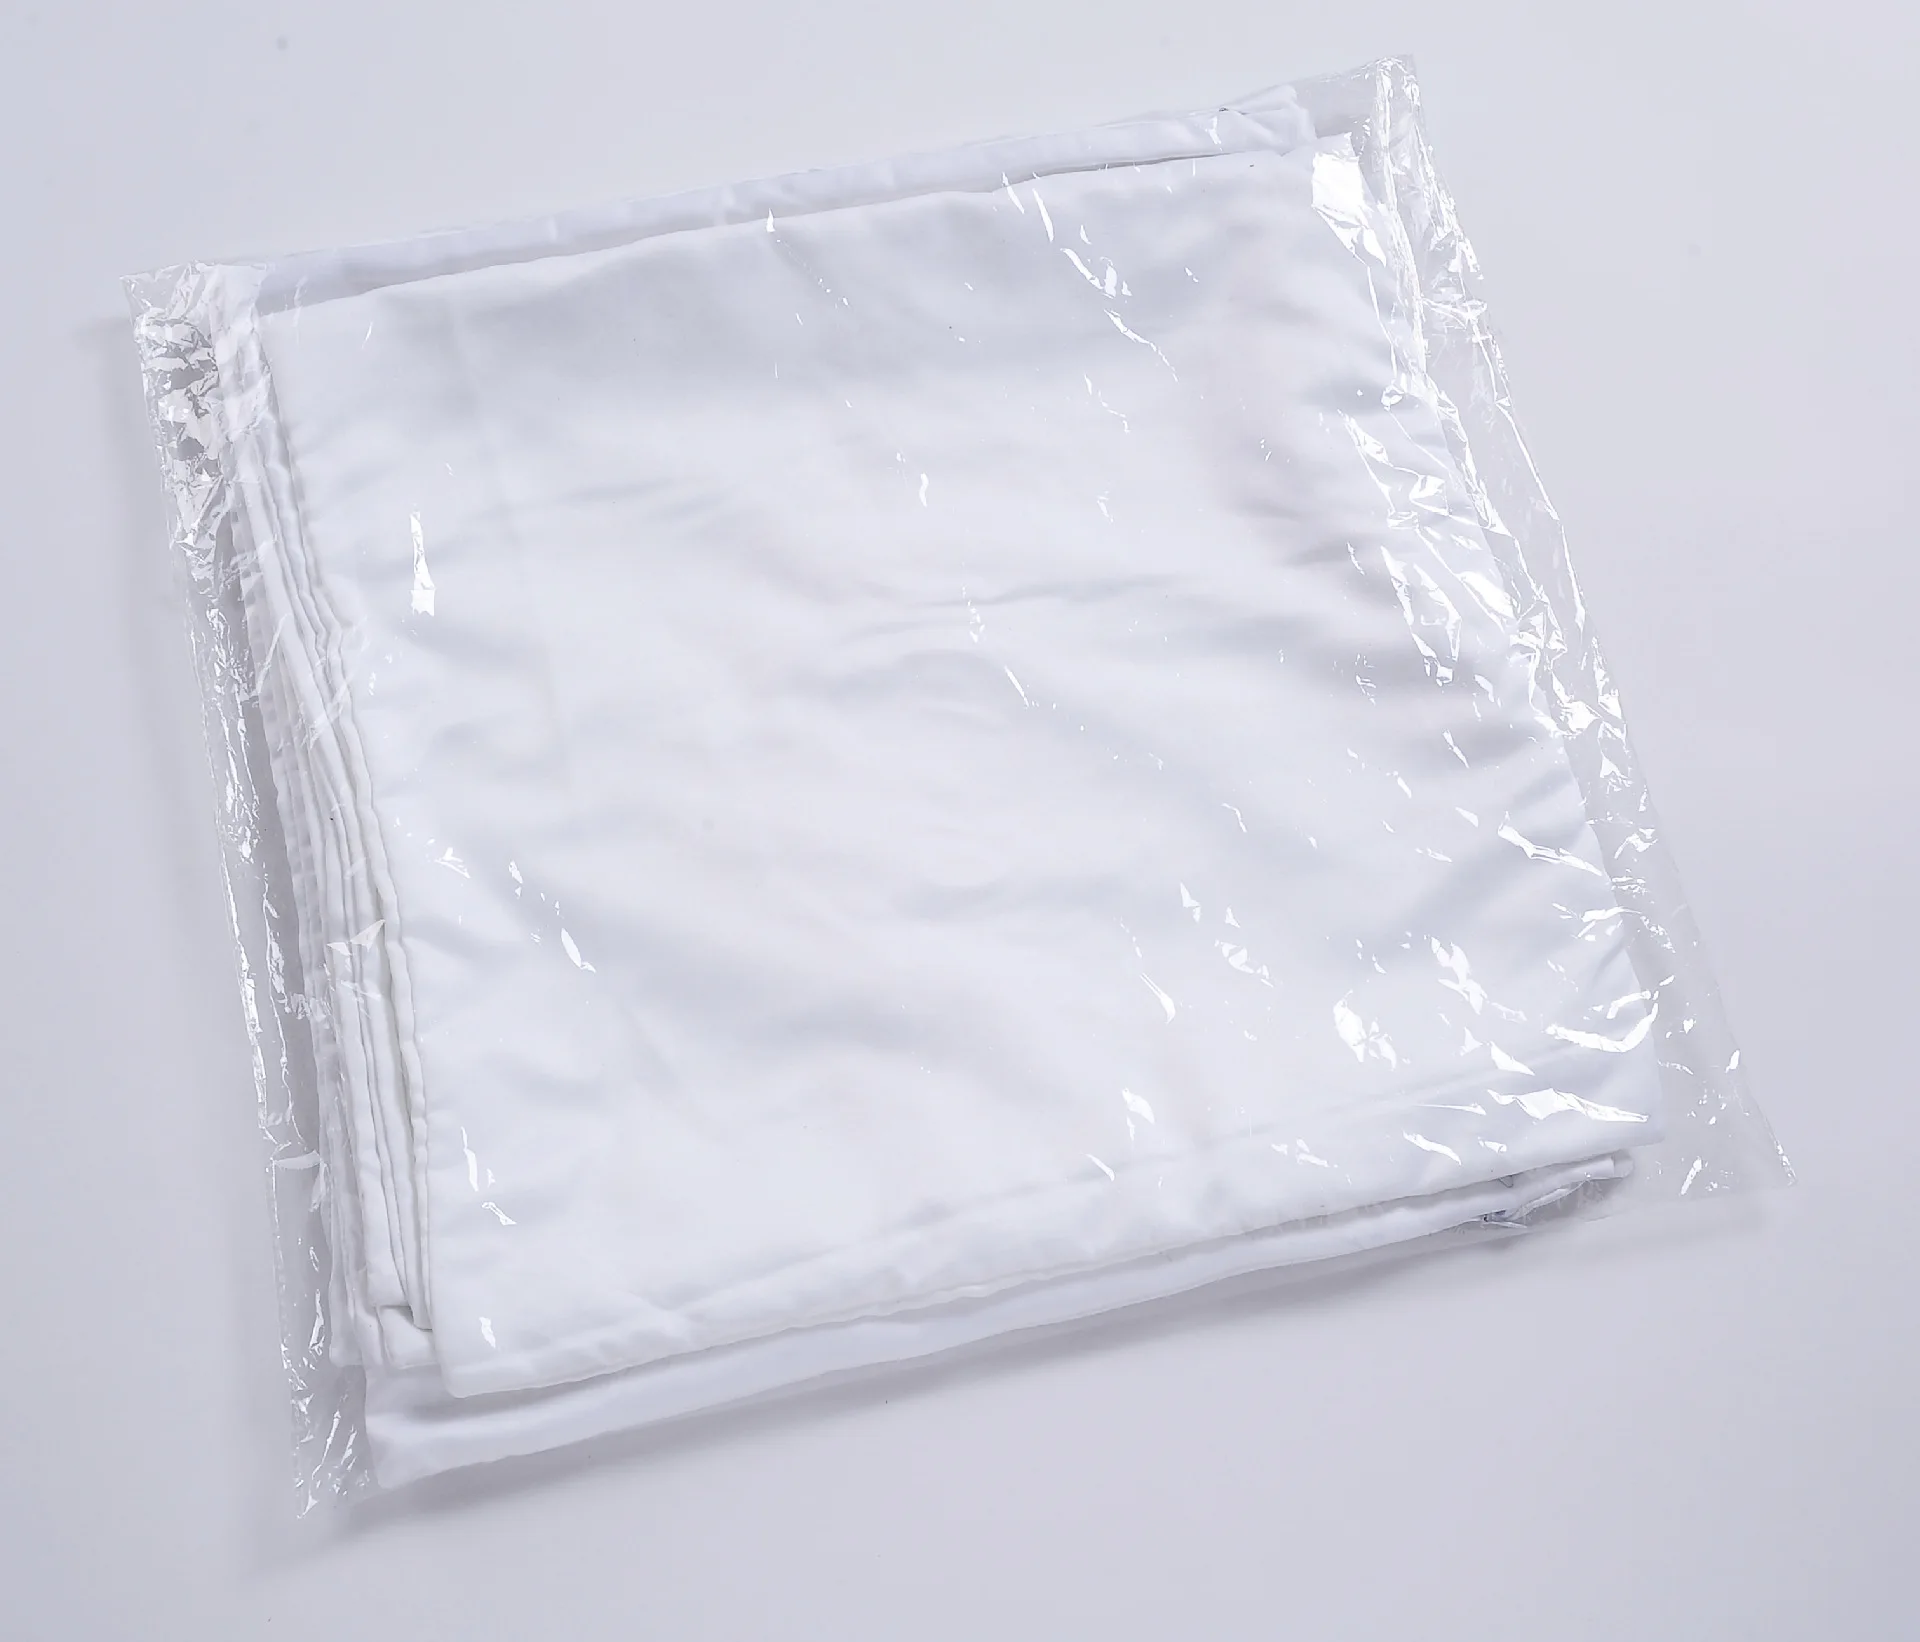 FREE SHIPPING 10pcs/lot 40x40cm Sublimation Blank pillowcase Polyester Peach Skin for Sublimation Transfer Printing DIY Gift free shipping 10pcs lot sublimation blank metal card case for consumables heat transfer printing diy gifts